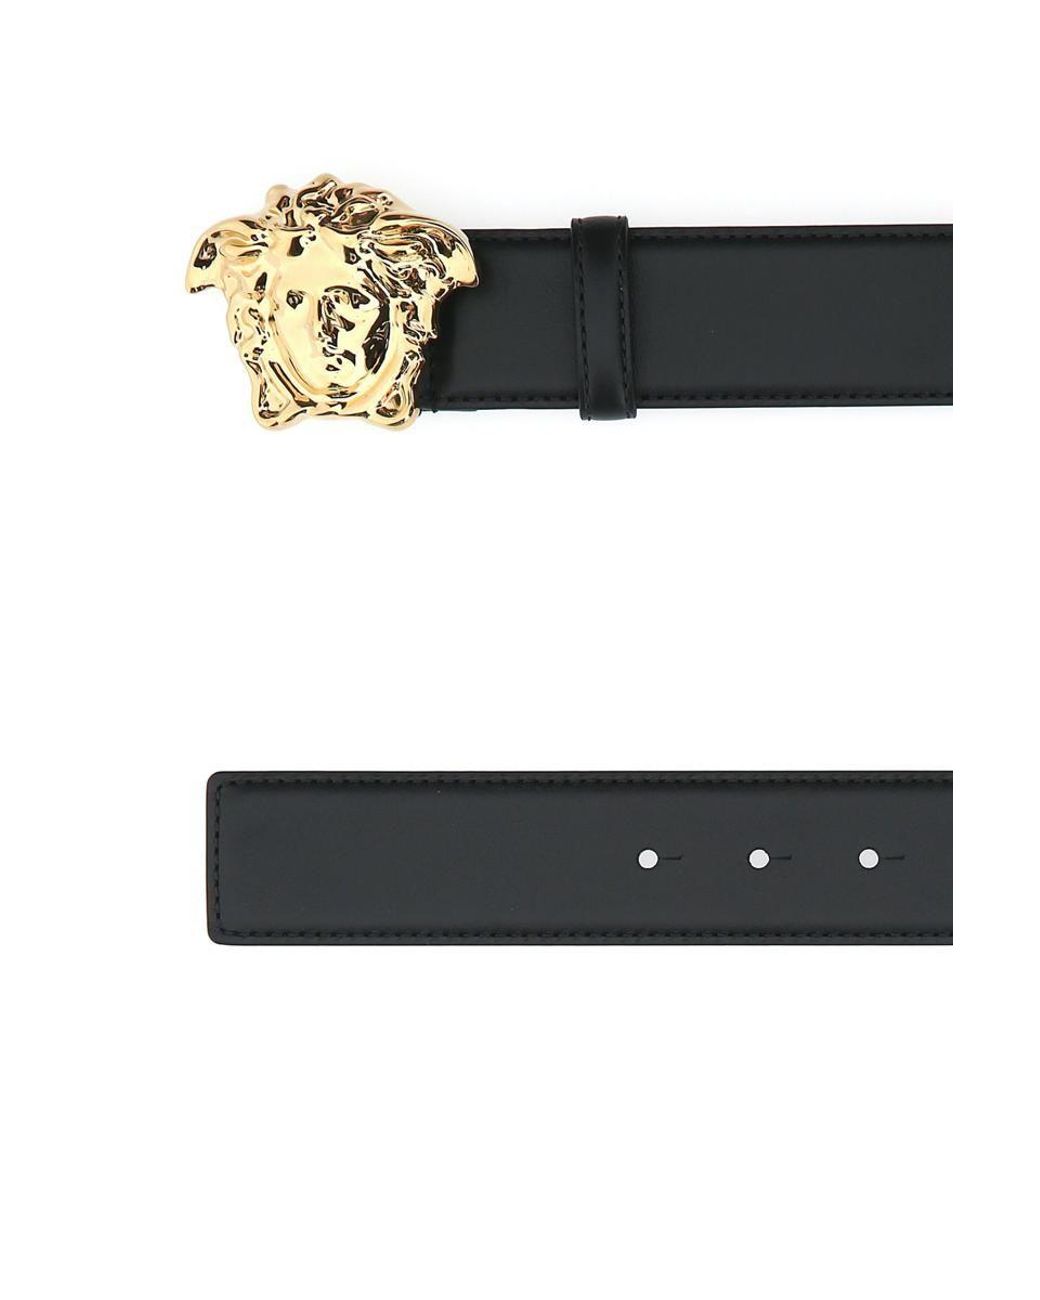 Powerful white. Find more #Versace Men's belts on versace.com